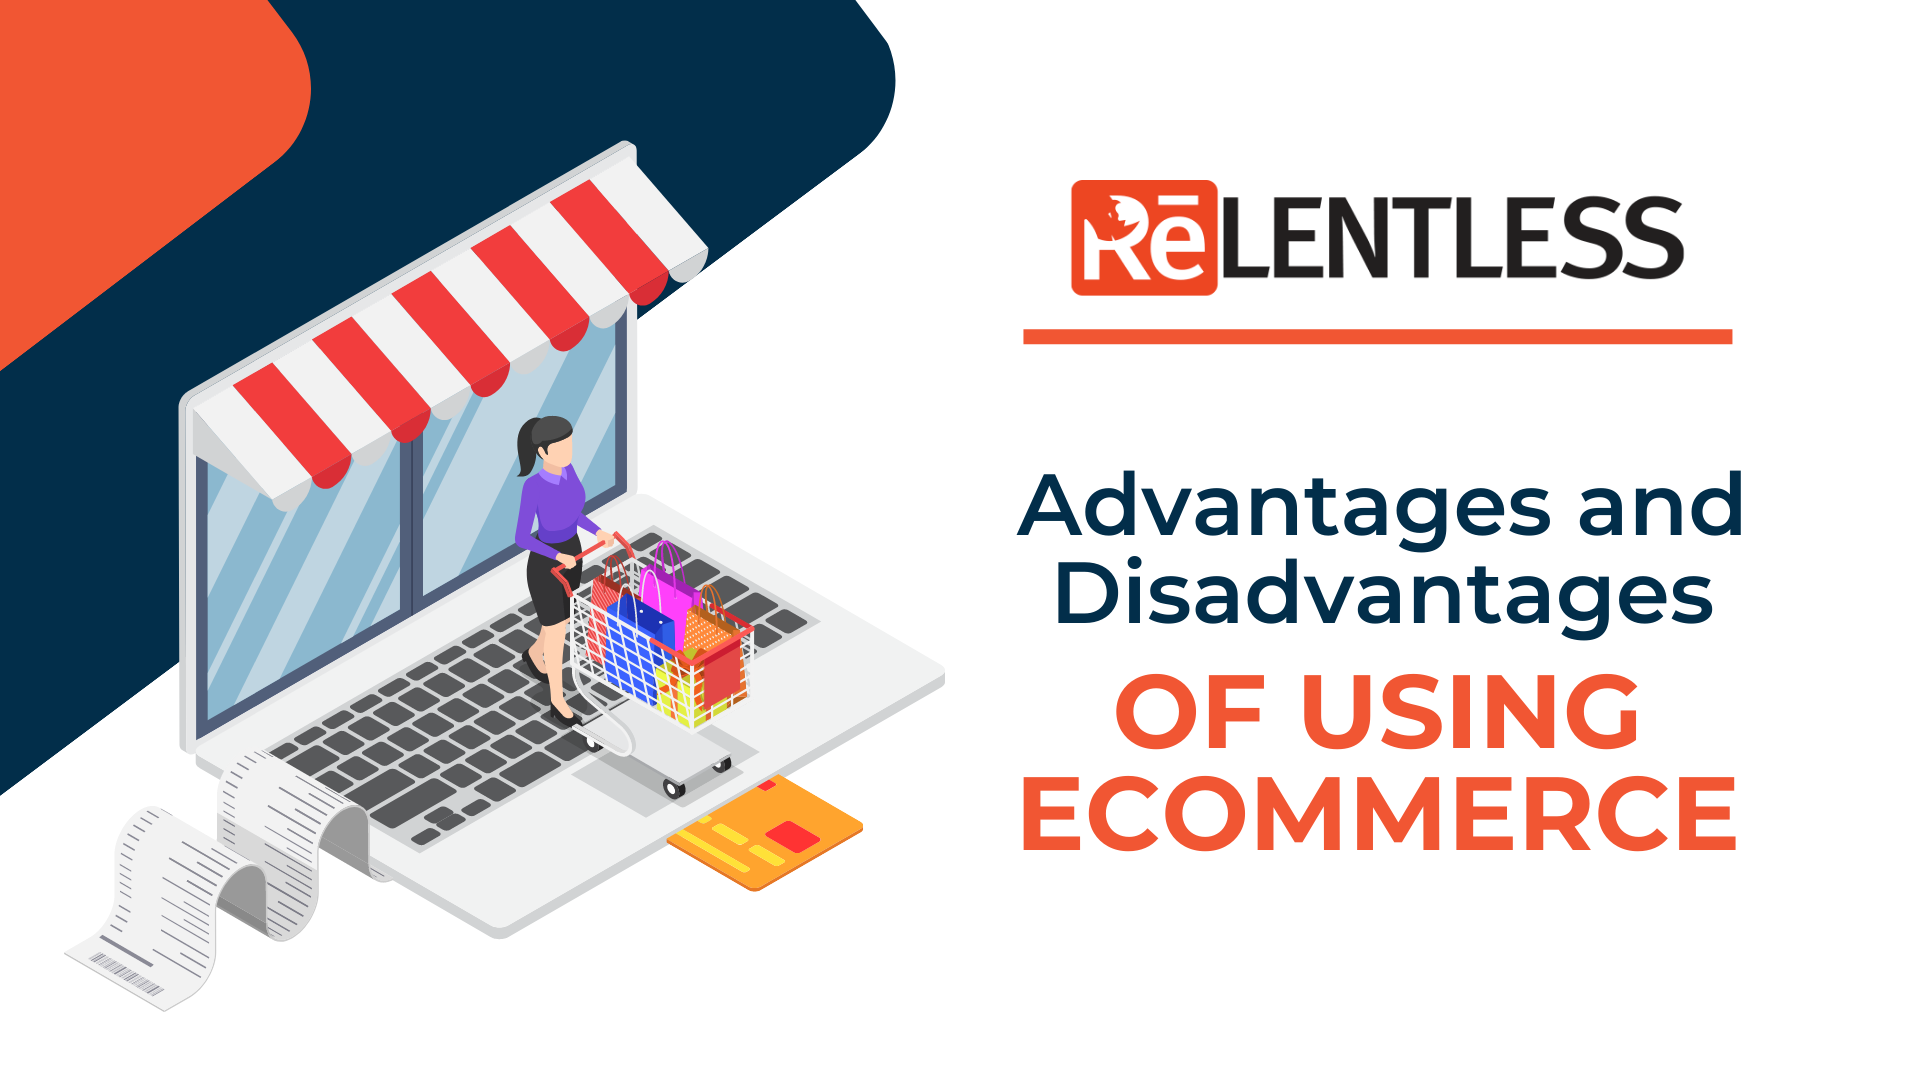 Advantages and Disadvantages of using eCommerce